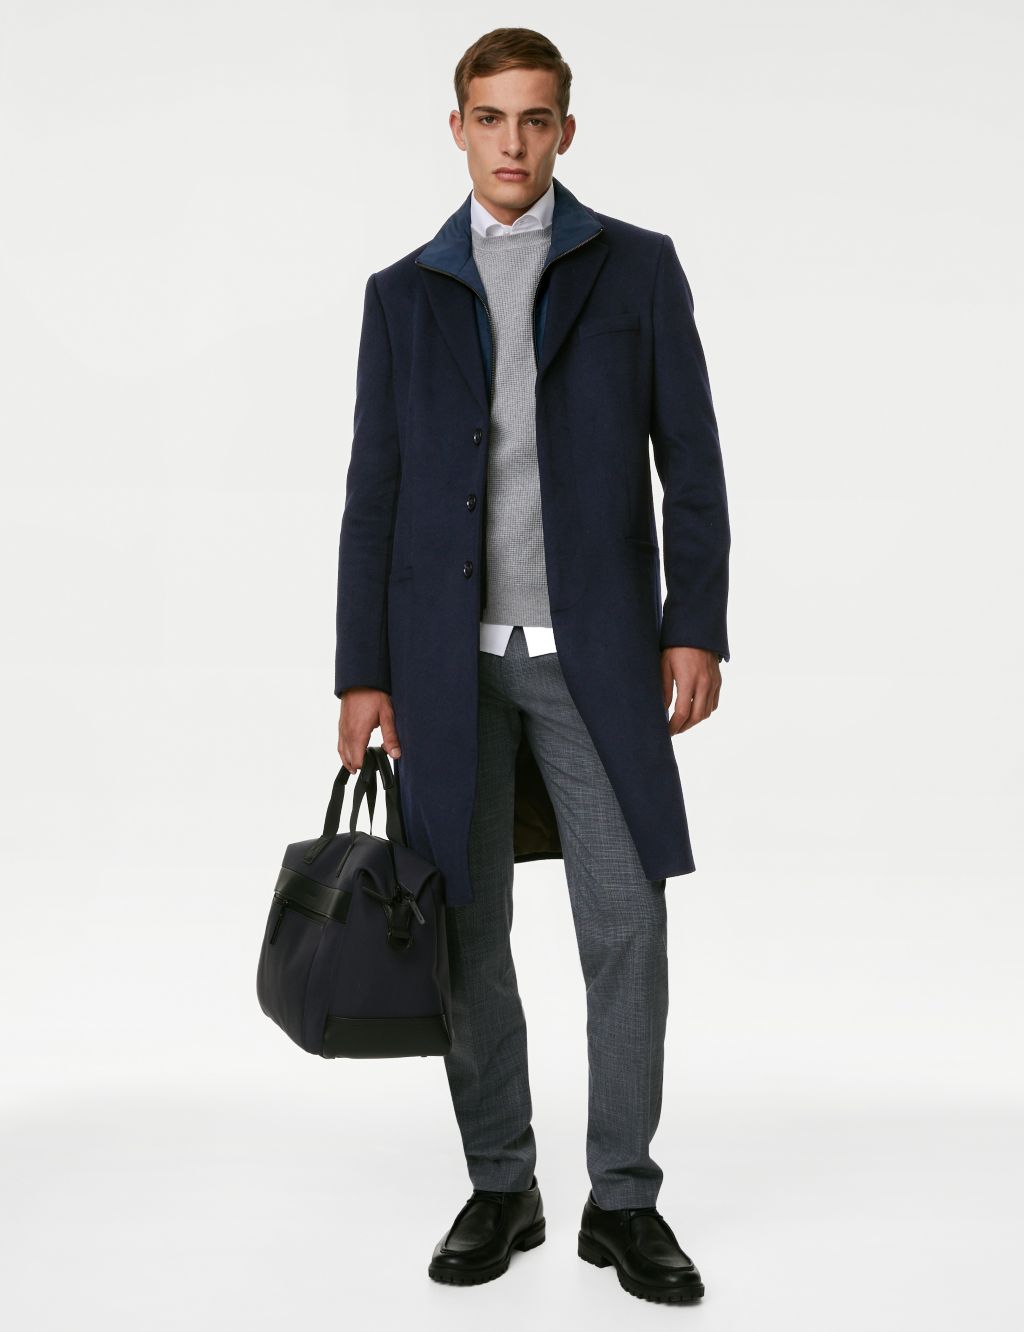 Wool Blend Removable Collar Overcoat image 1